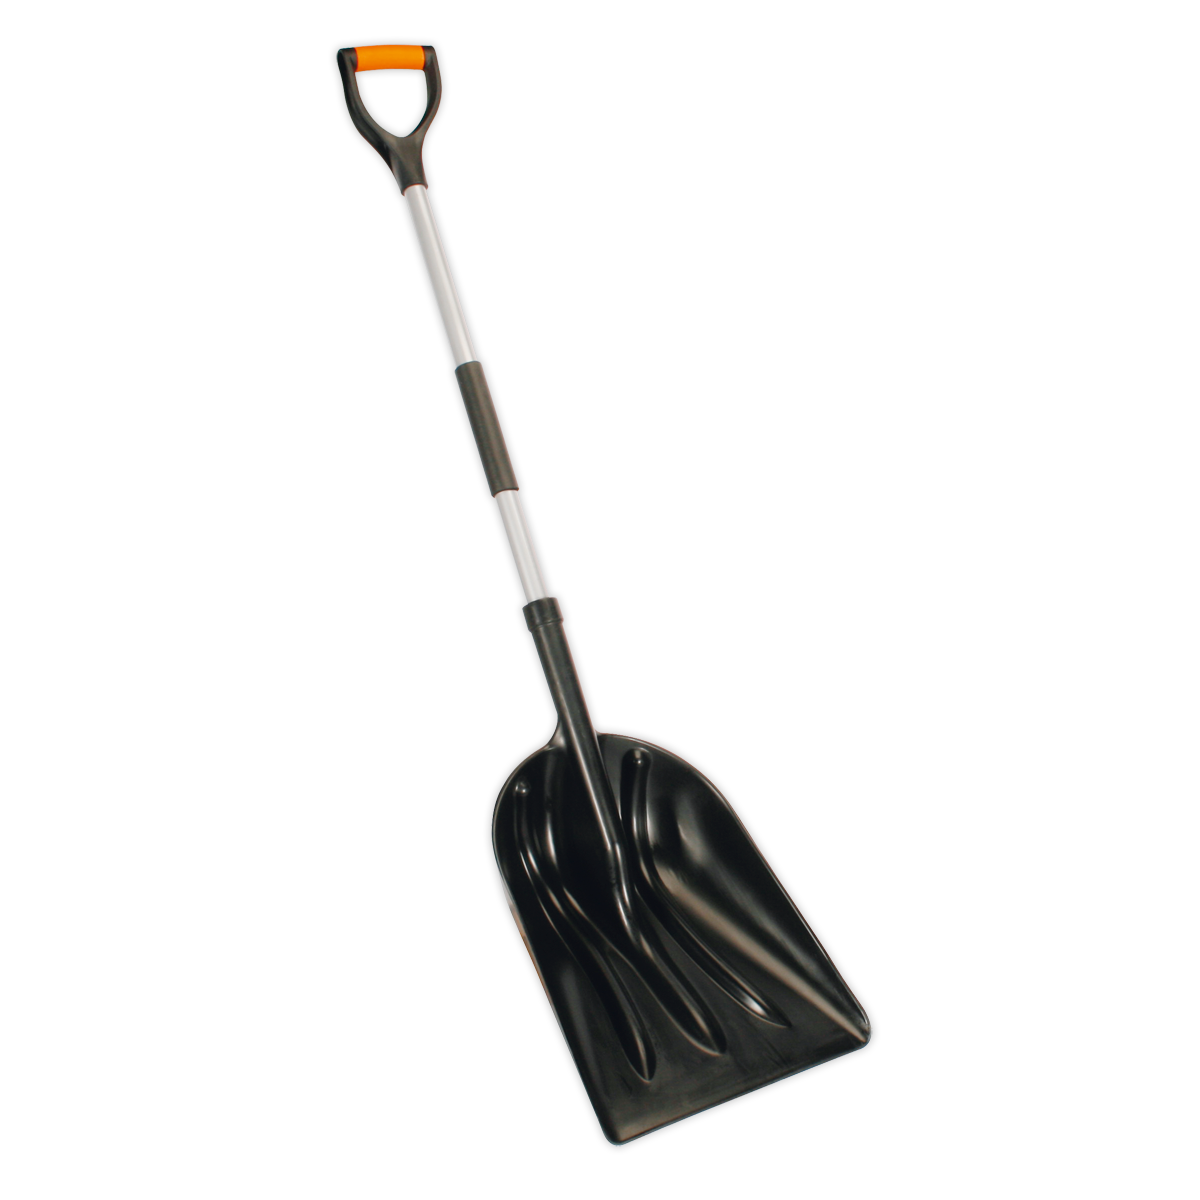 Sealey General-Purpose Shovel with 900mm Metal Handle